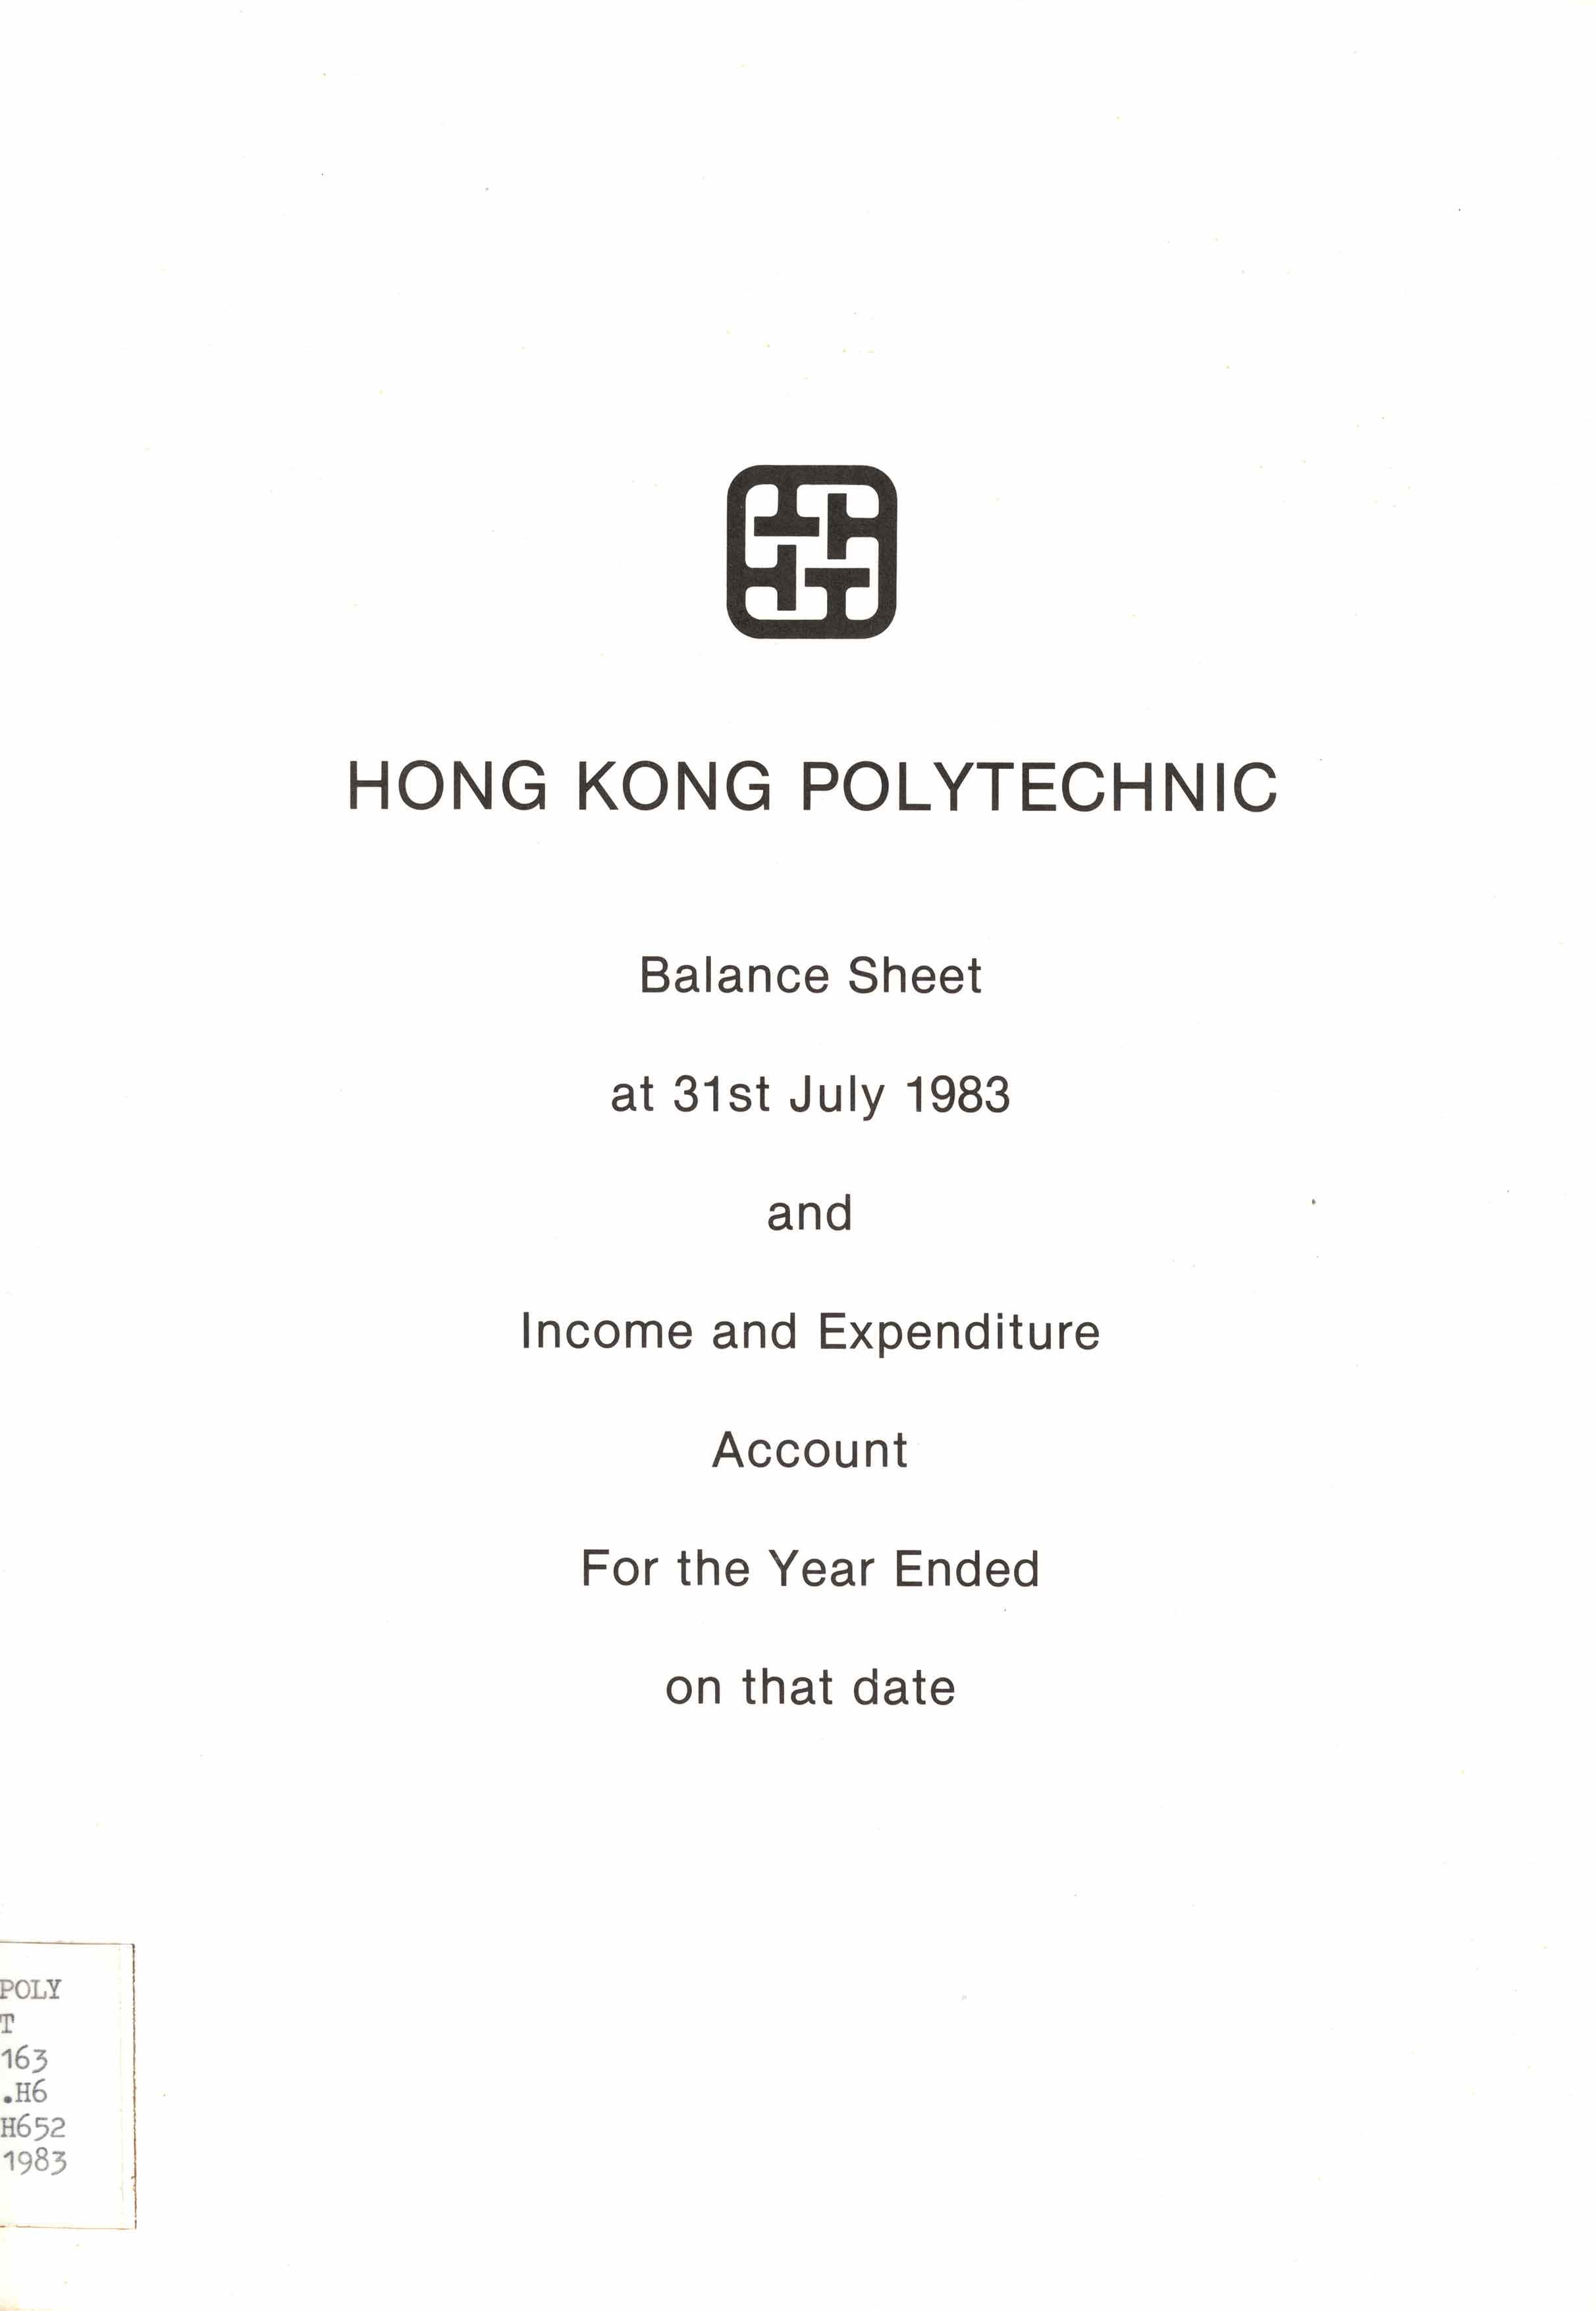 Balance sheet at 31st July 1983 and income and expenditure account for the year ended on that date